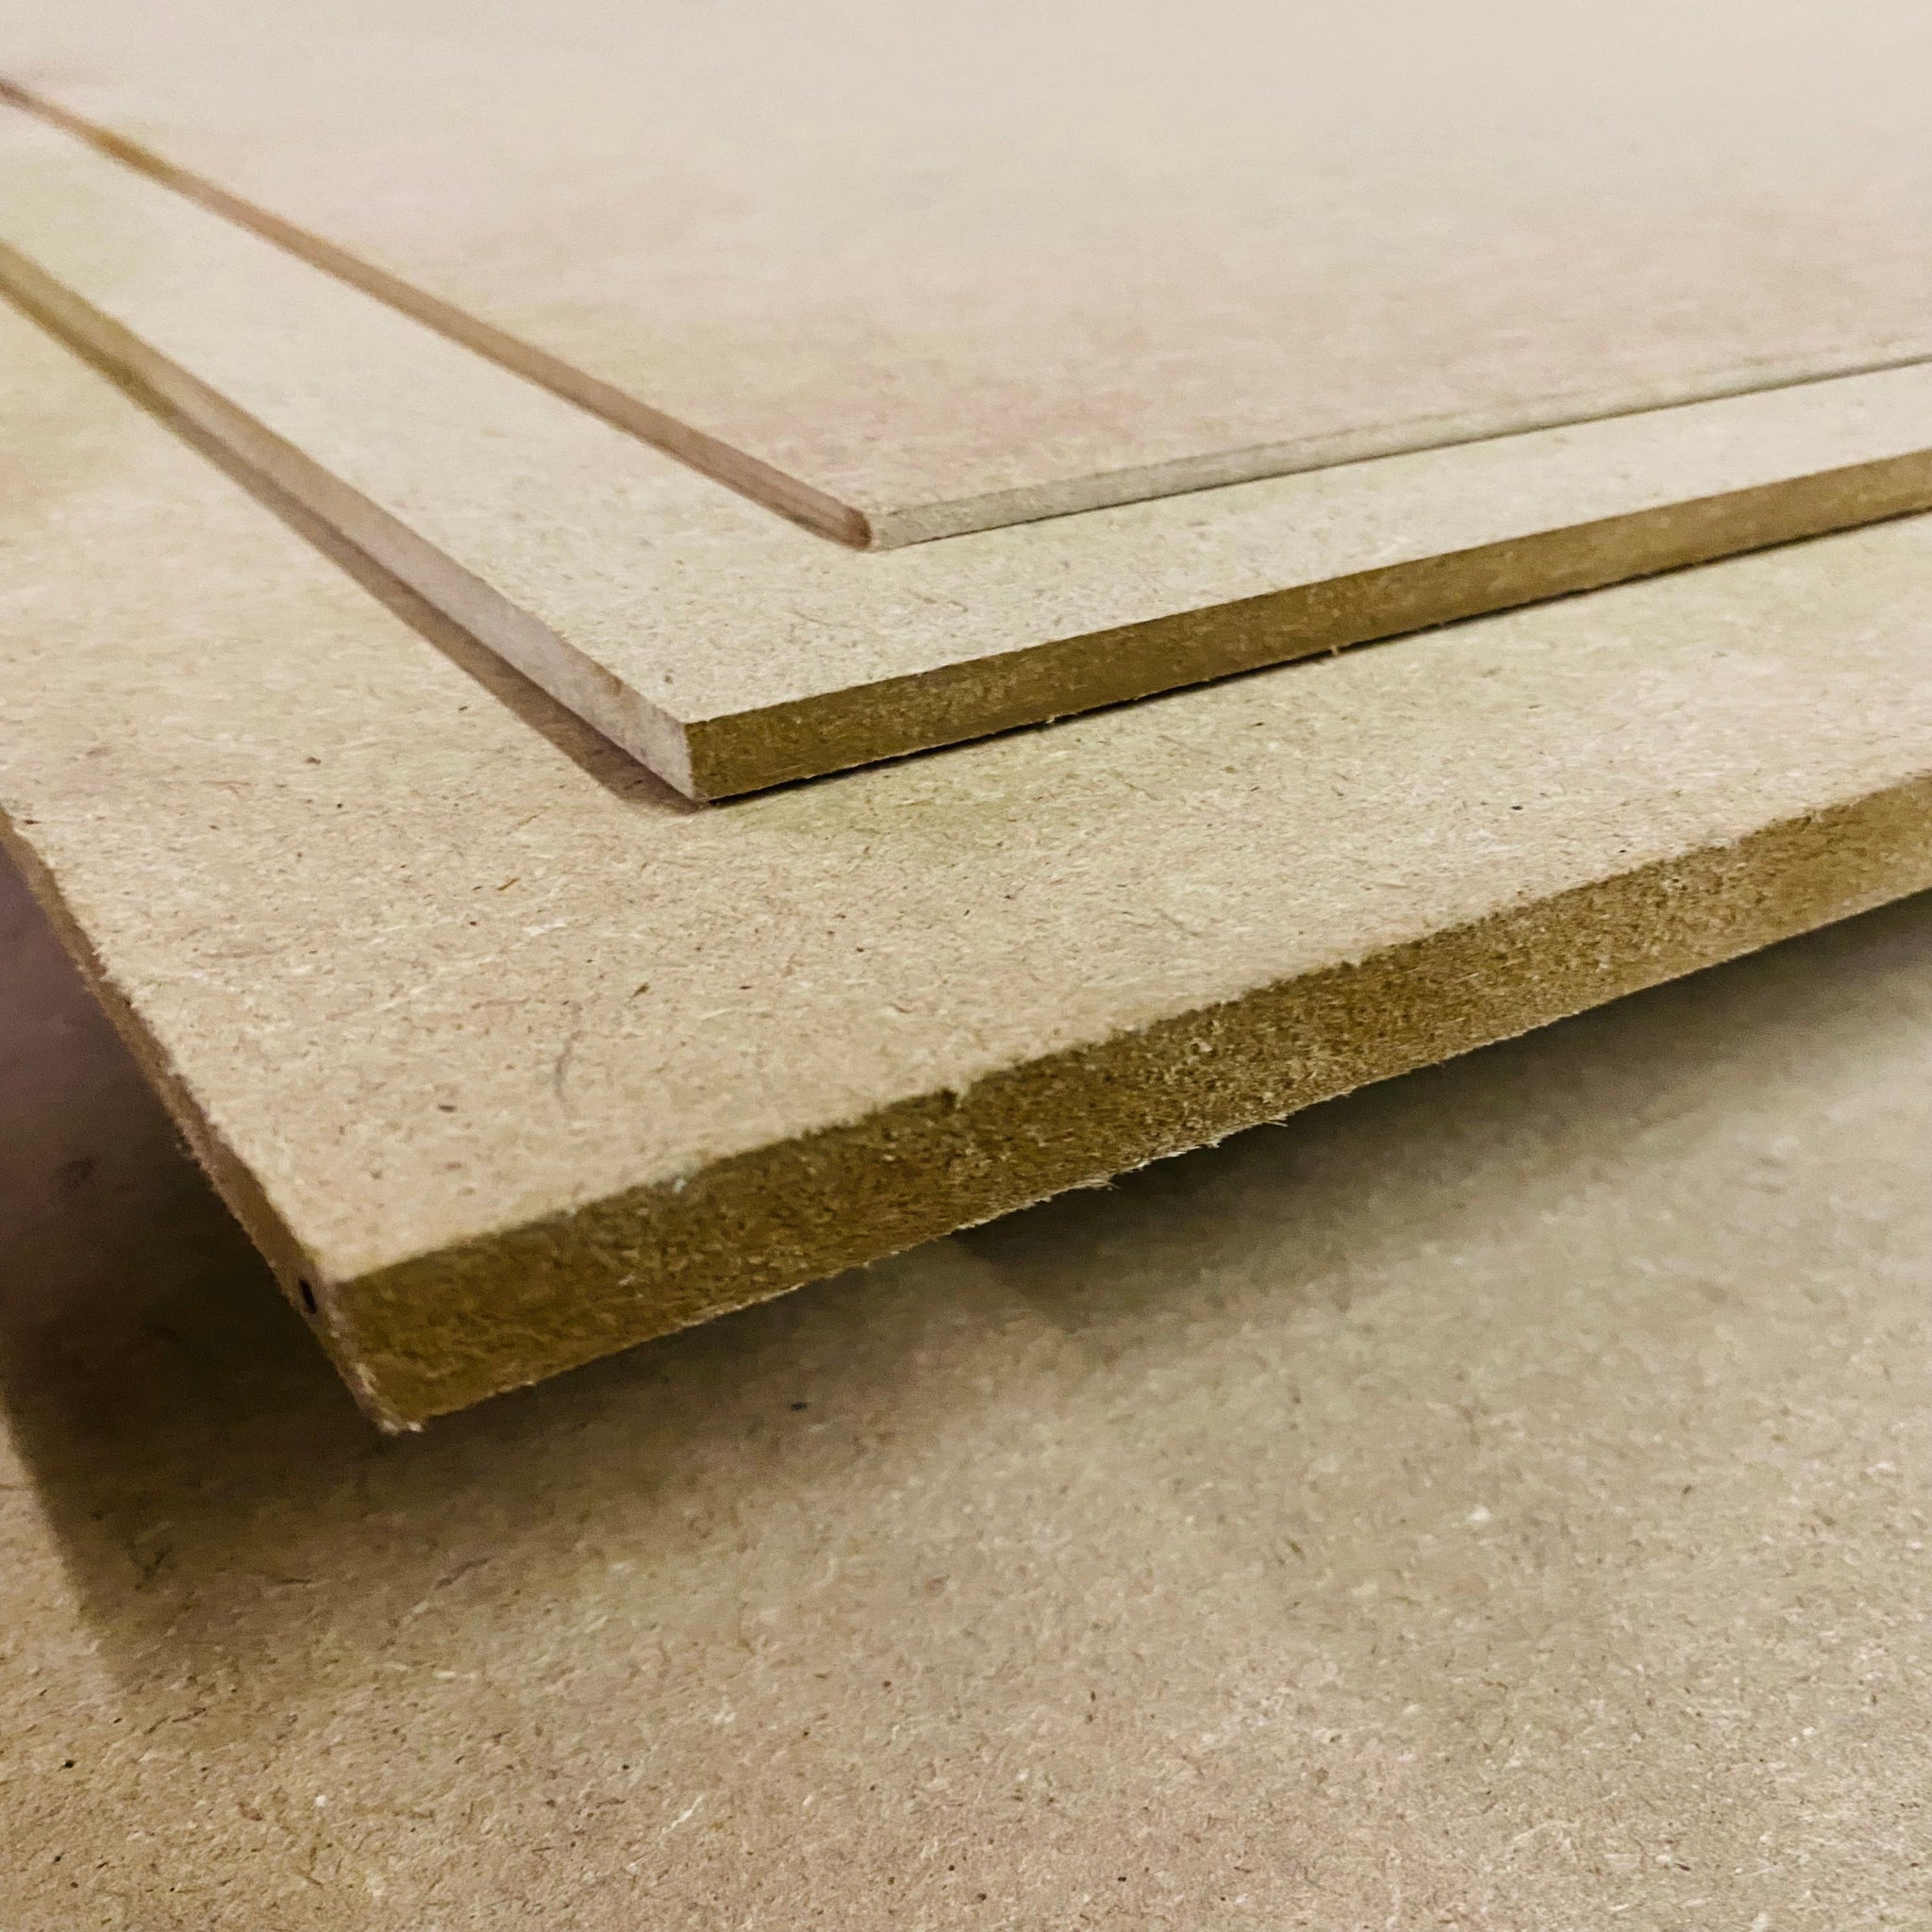 Wooden Boards - Plywood, MDF, HDF, Plyboard And Particle board